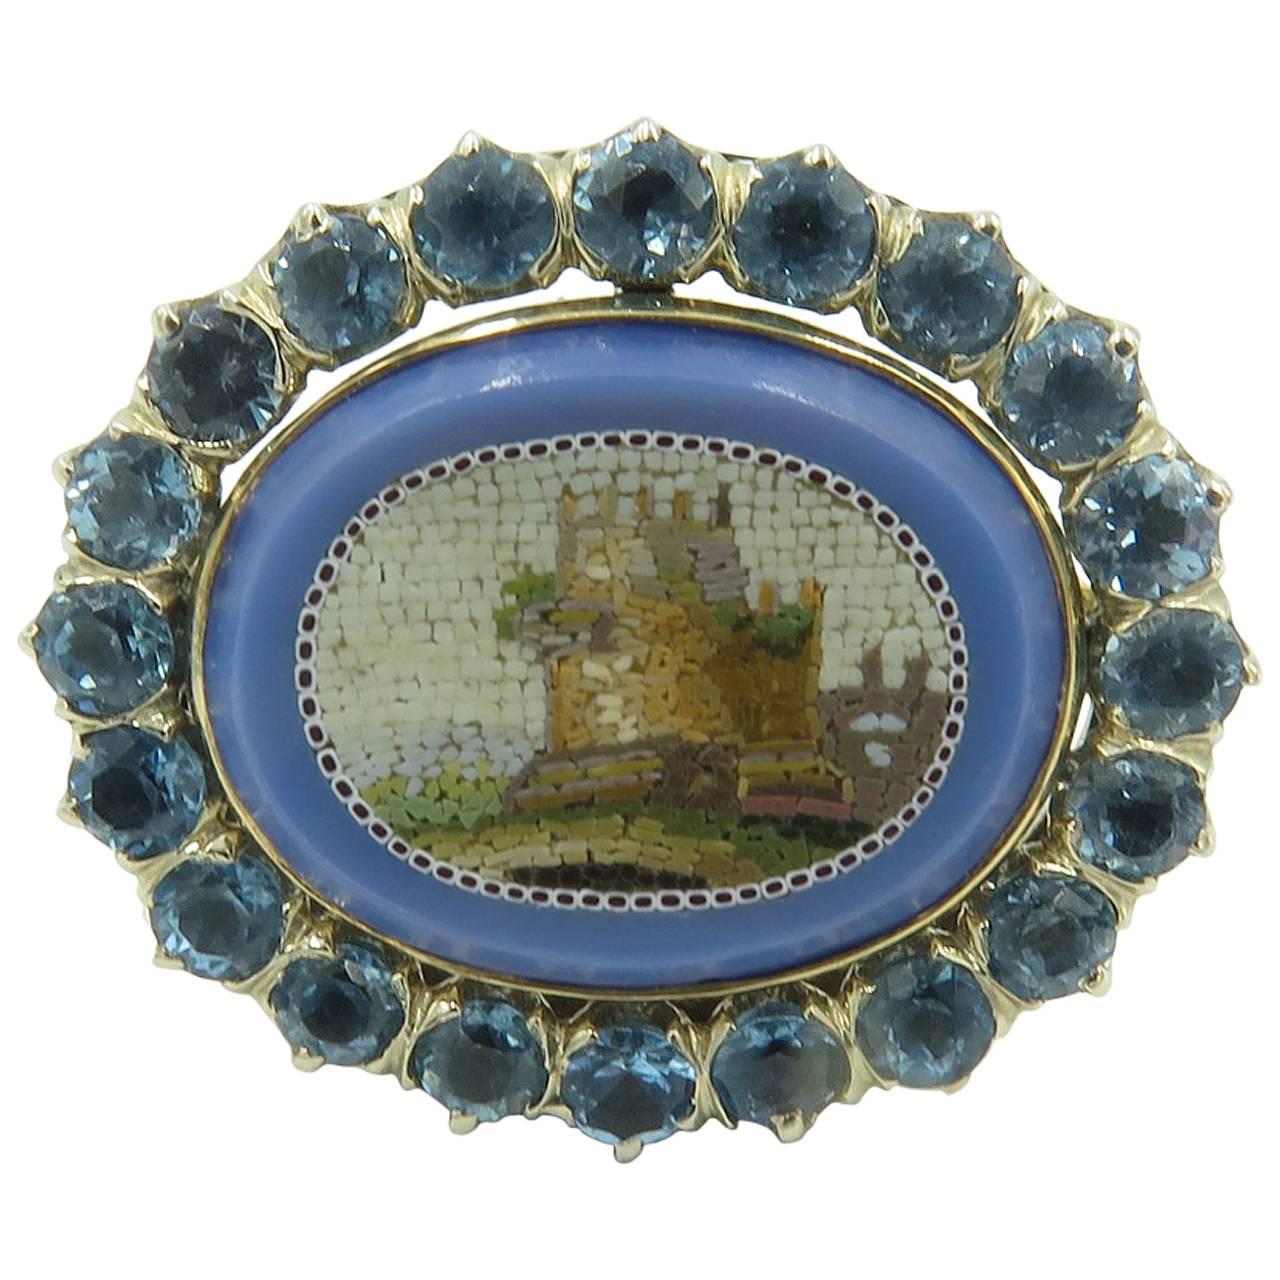 19th Century Vatican School micromosaic ring depicting the Torre Normana